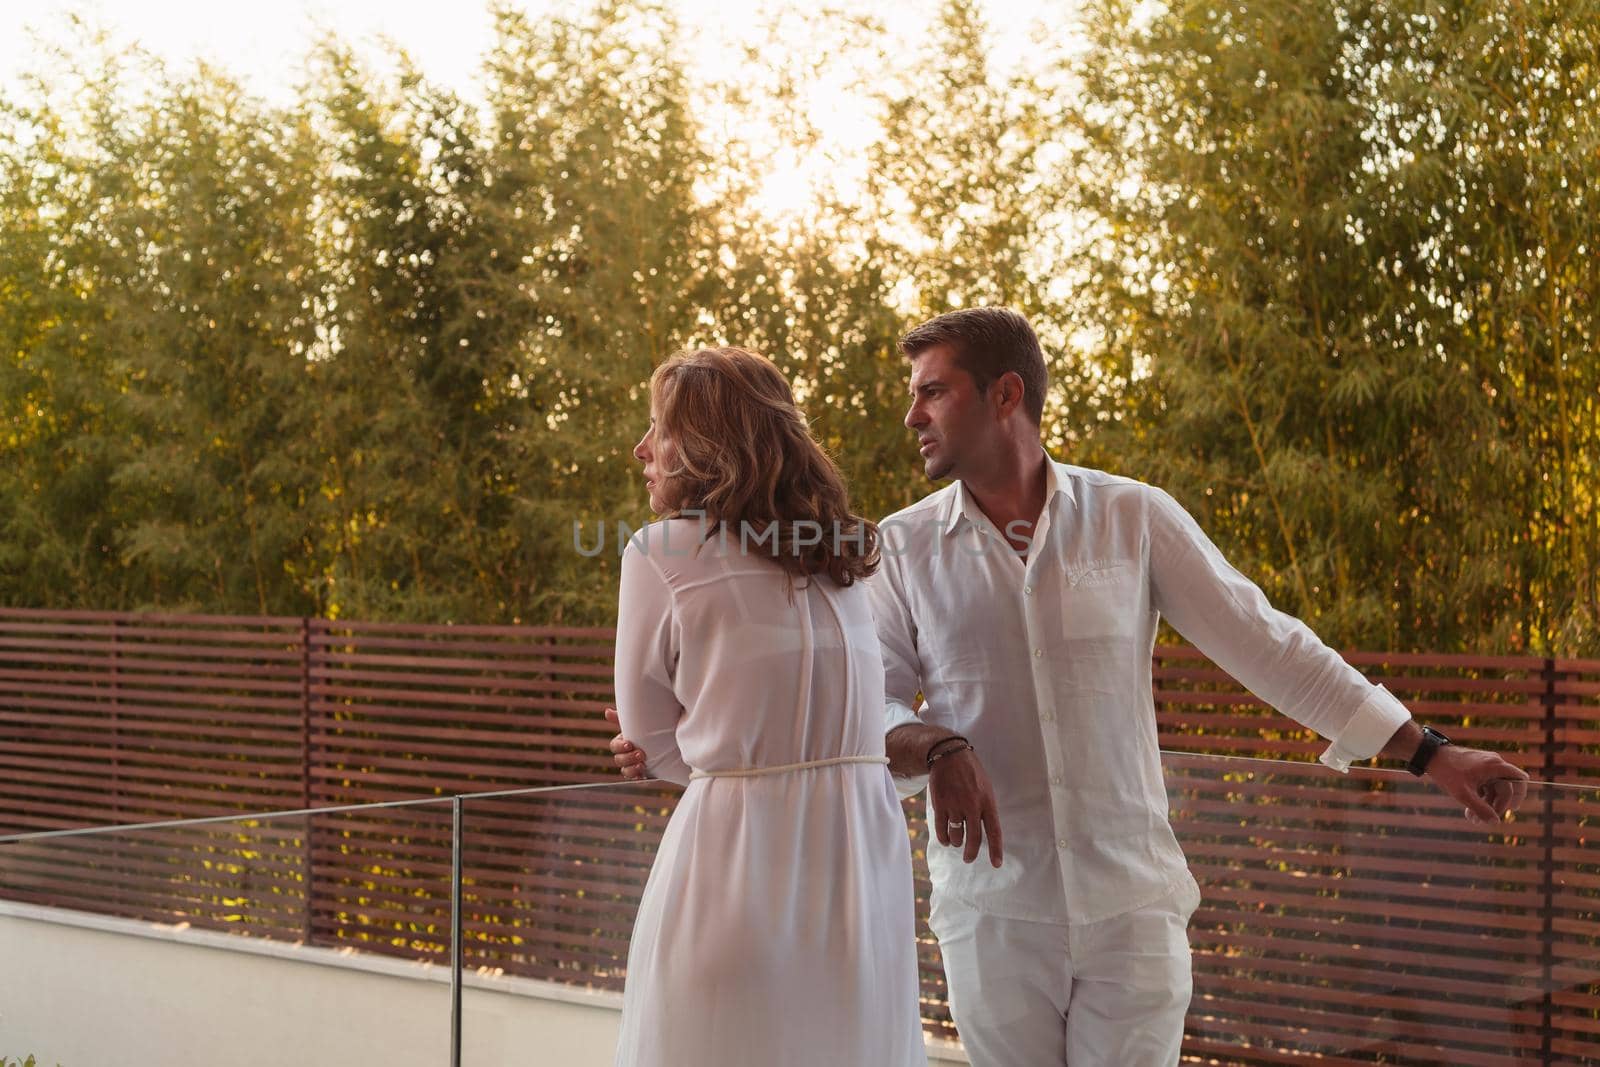 The senior couple enjoys on the terrace of a luxury house during the holidays. Selective focus. High-quality photo